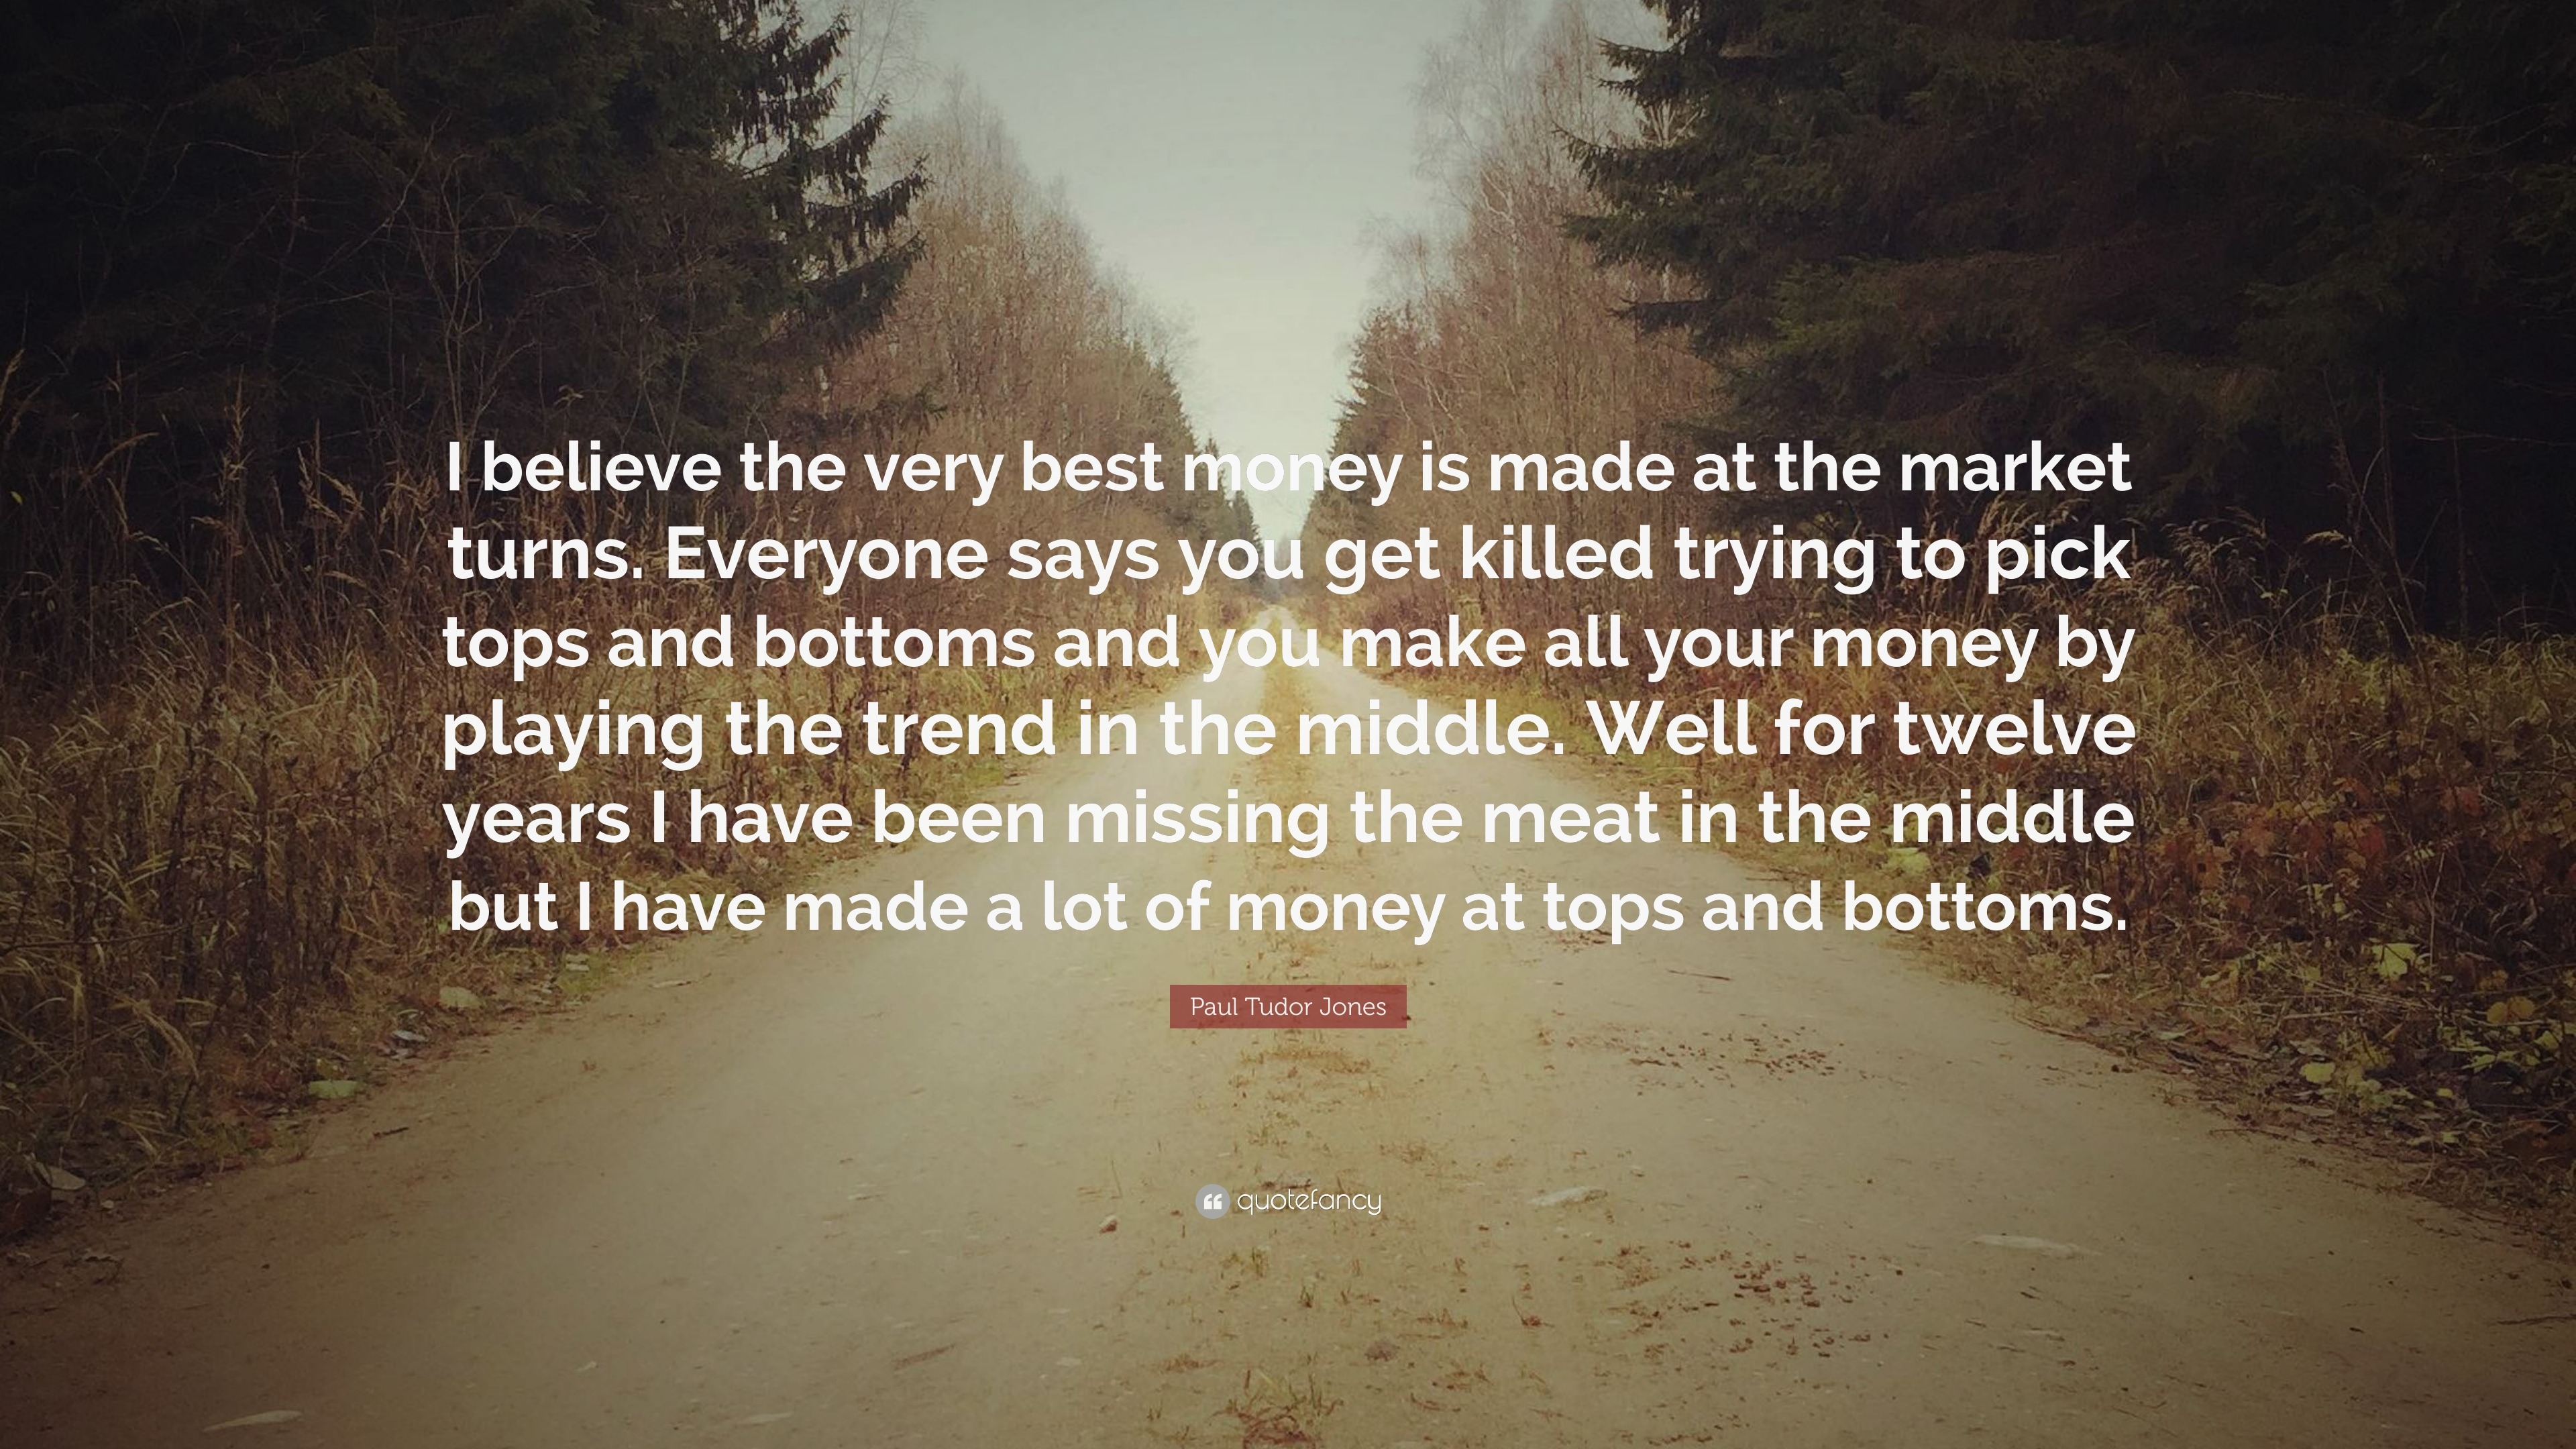 Paul Tudor Jones Quote: “I believe the very best money is made at the